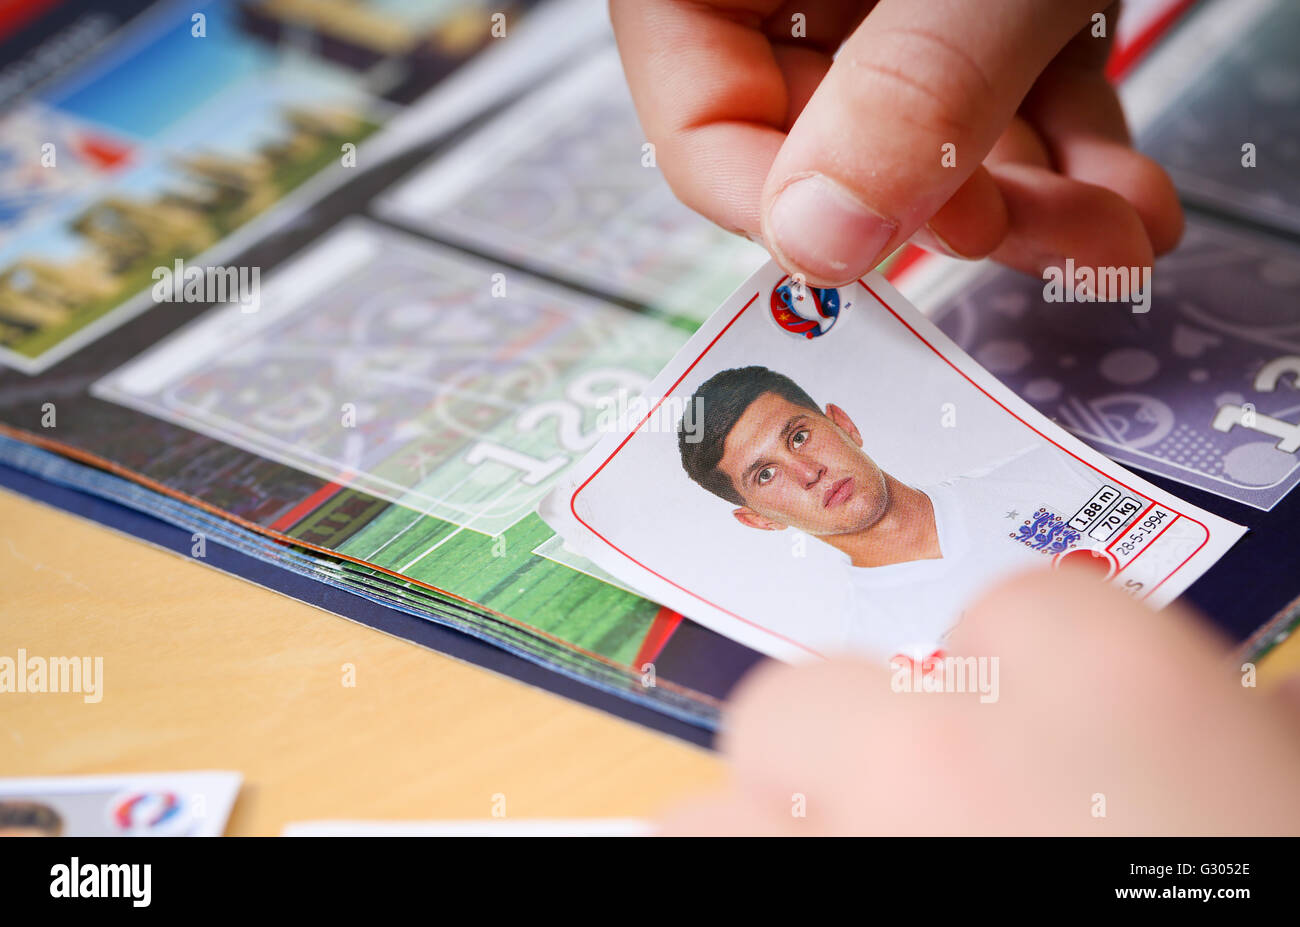 A boy putting Panini football stickers in to an album Stock Photo